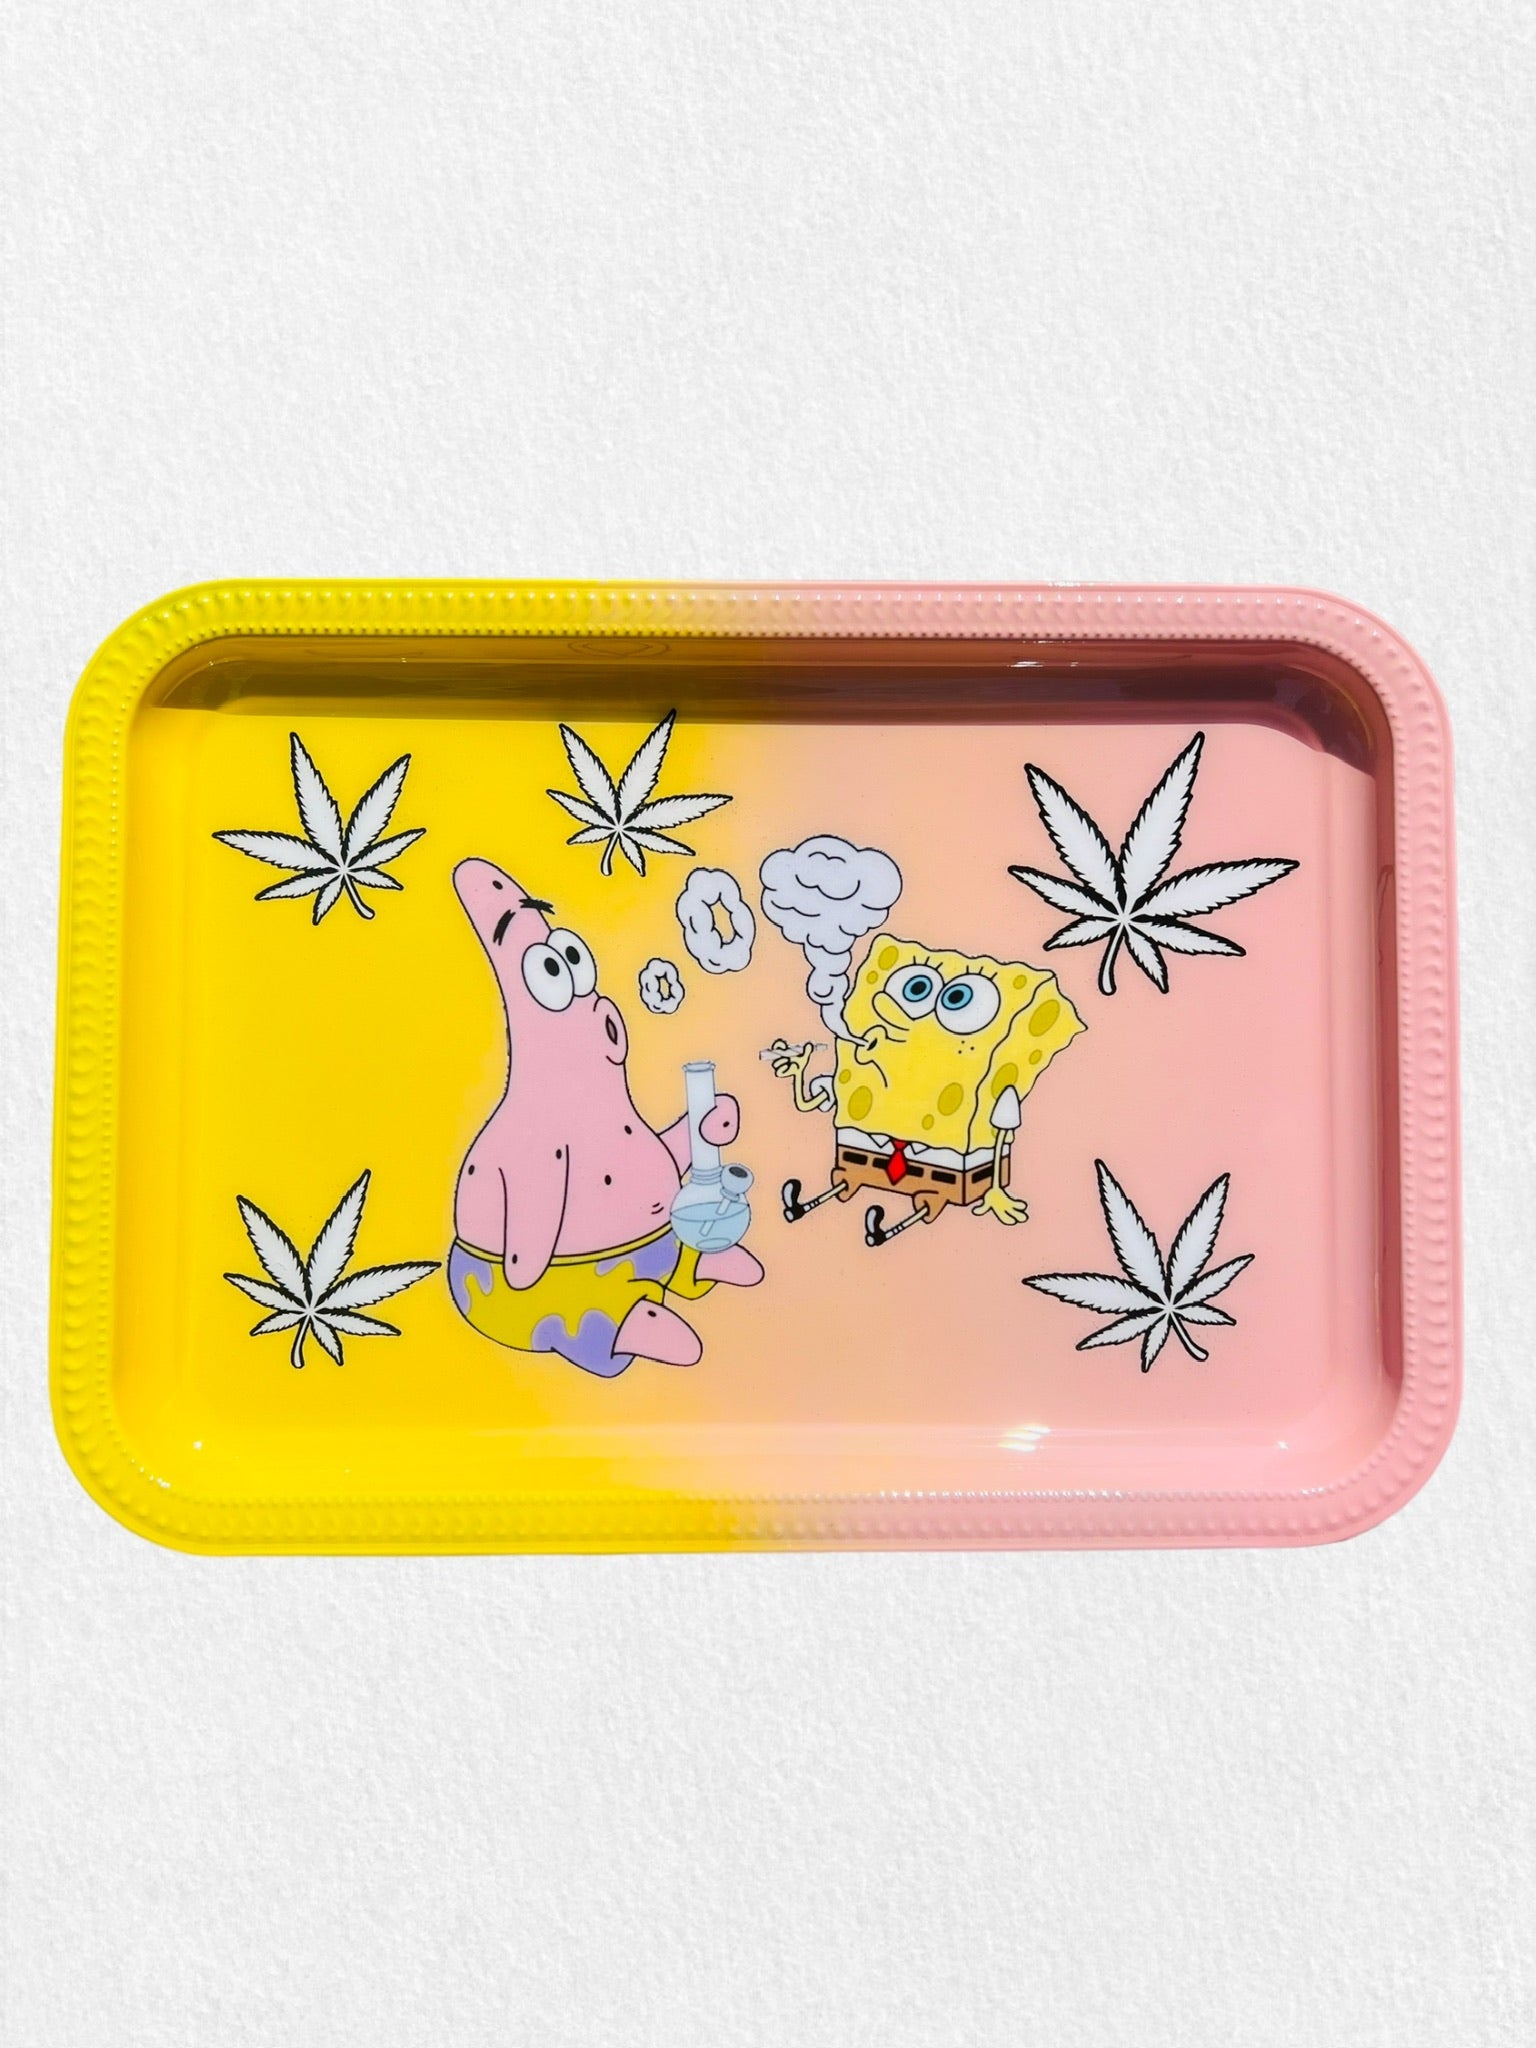 Custom Rolling Trays and Smoker Sets